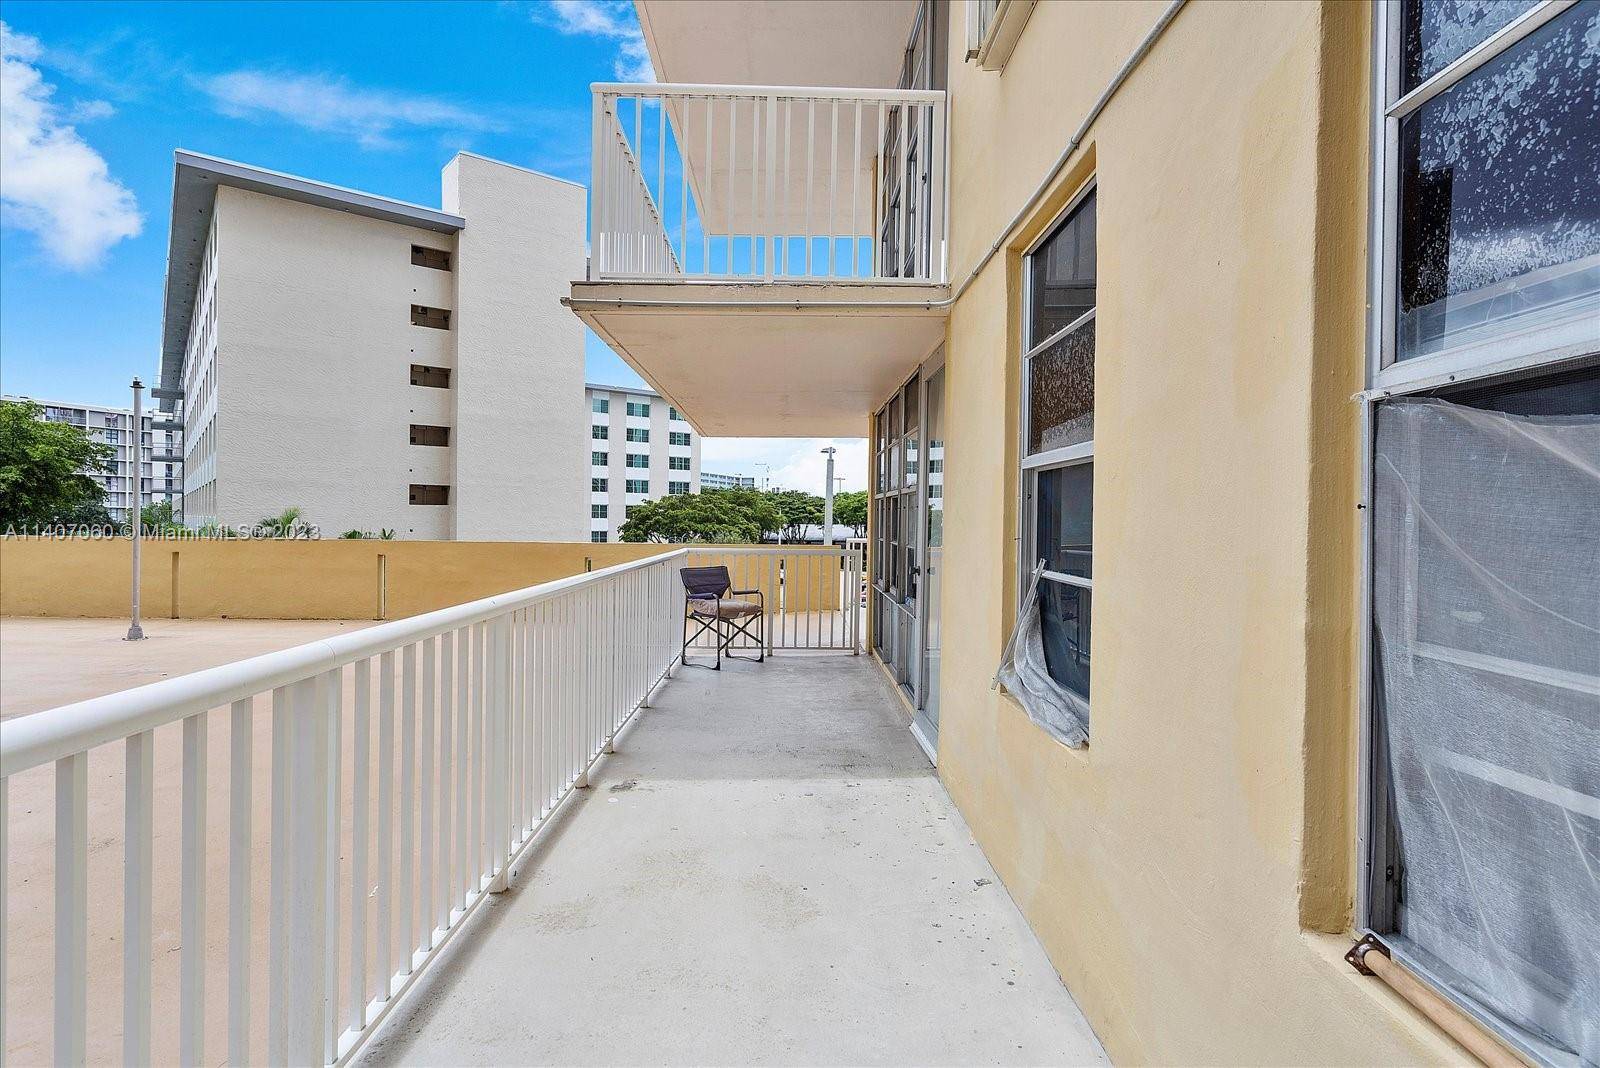 Wonderful huge corner condo available now, featuring 1856 Sq Ft of living space and lots of natural light with a lanai balcony that opens up to the pool deck.